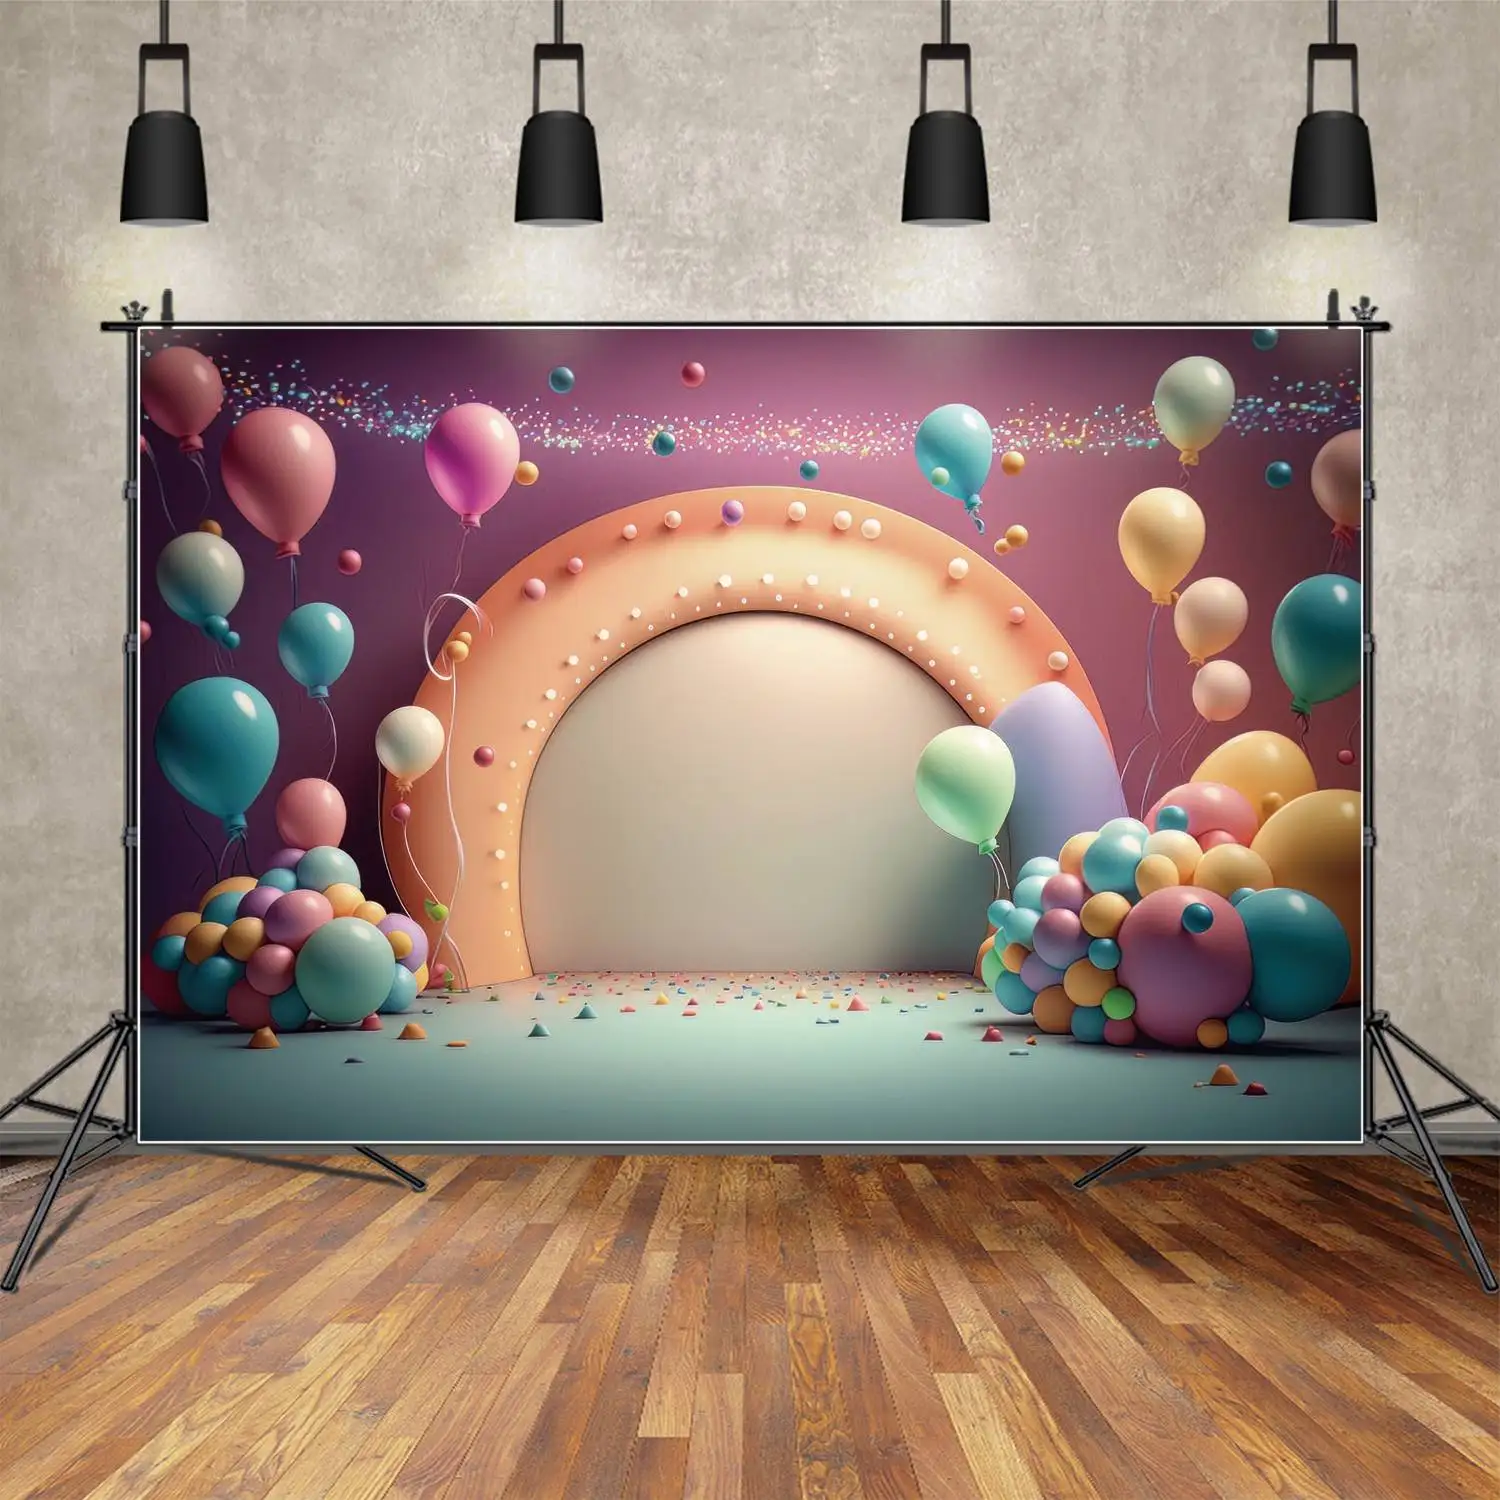 

Birthday Party Arch Photography Backdrops Colorful Balloon Glitters Customized Children Photo Backgrounds Photoshoot Props